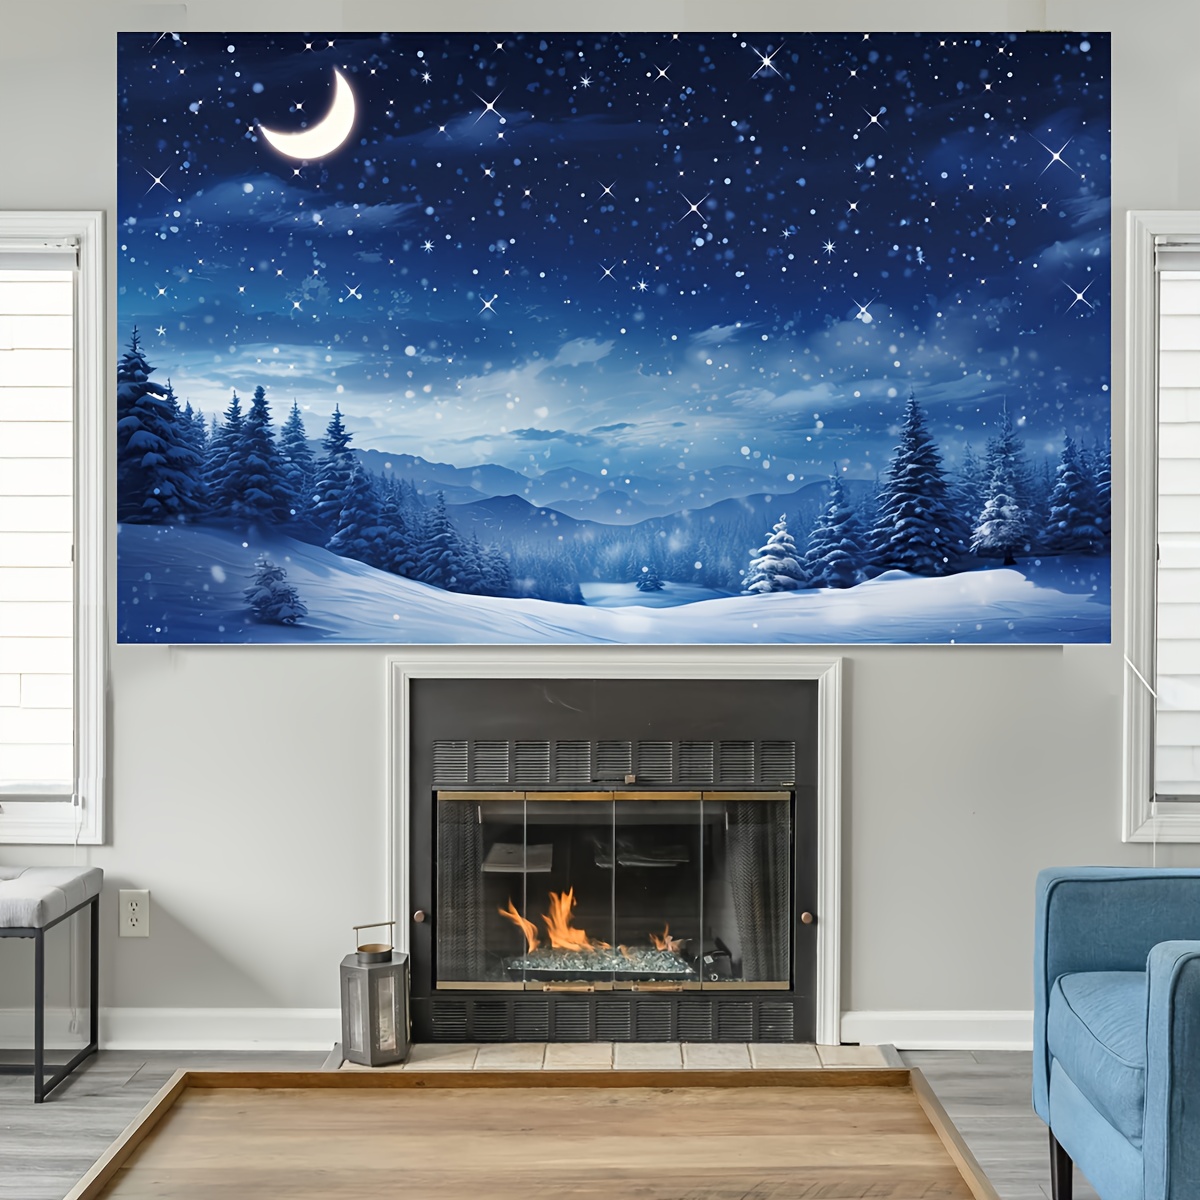 Yeele 6x4ft Winter Night Snowfall Snowflake Photography Backdrops Starry  Sky Moon Blurry Fir Trees Pine Forest Background Merry Christmas Happy New